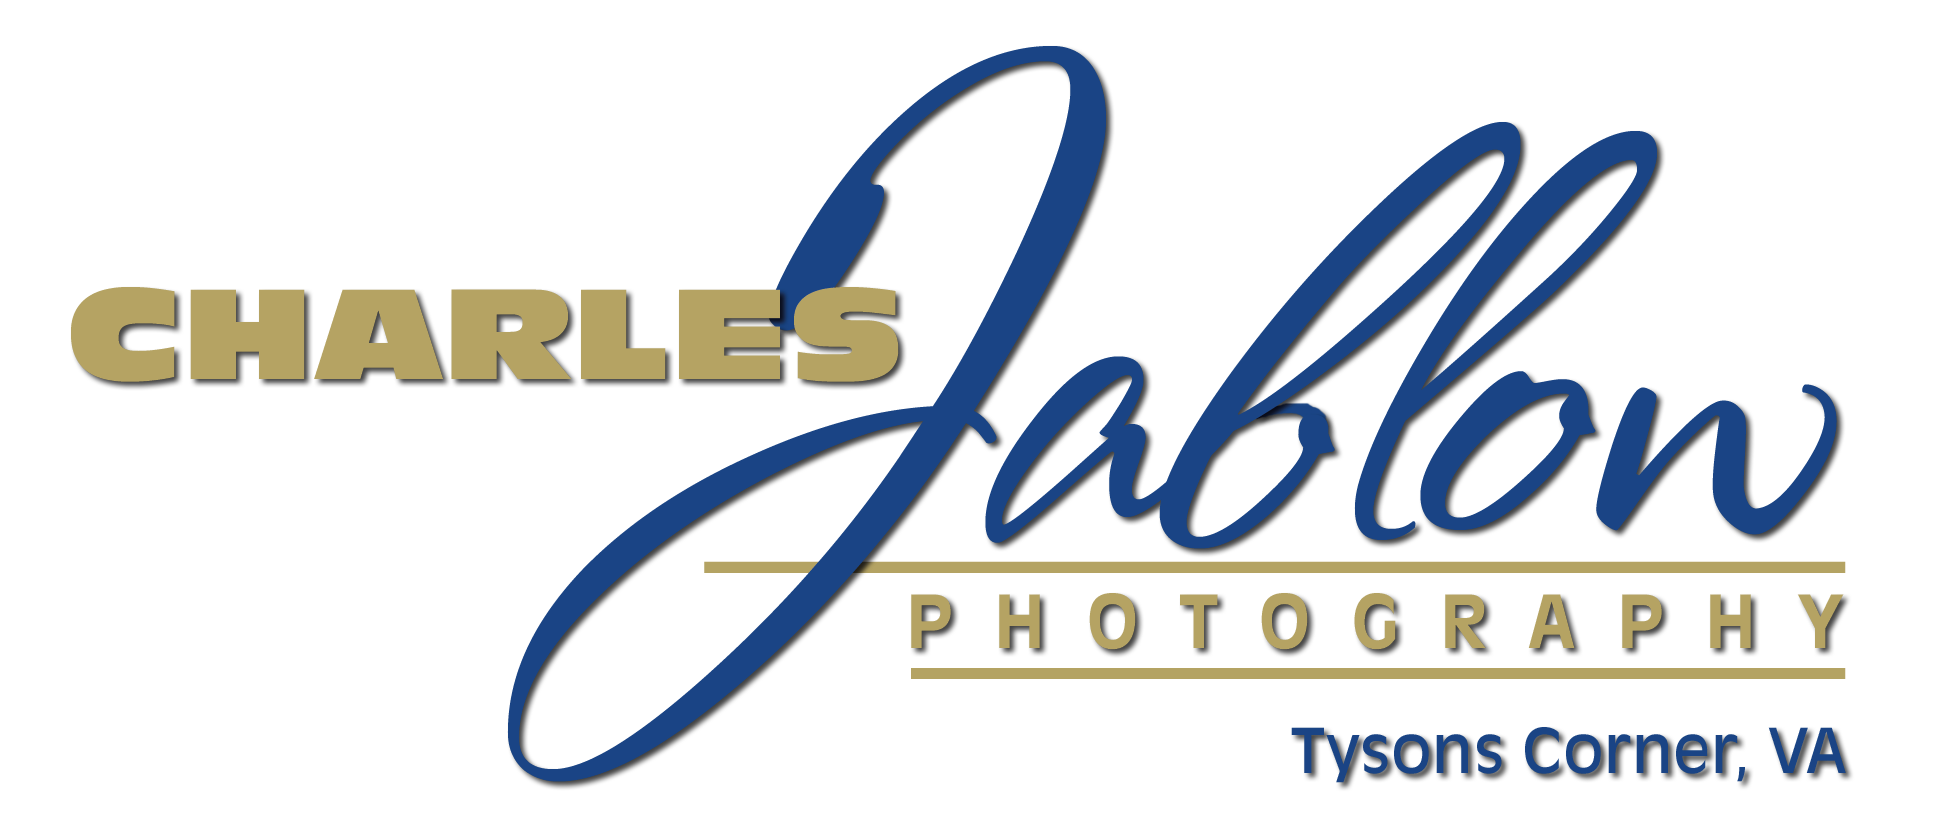 Charles Jablow Photography